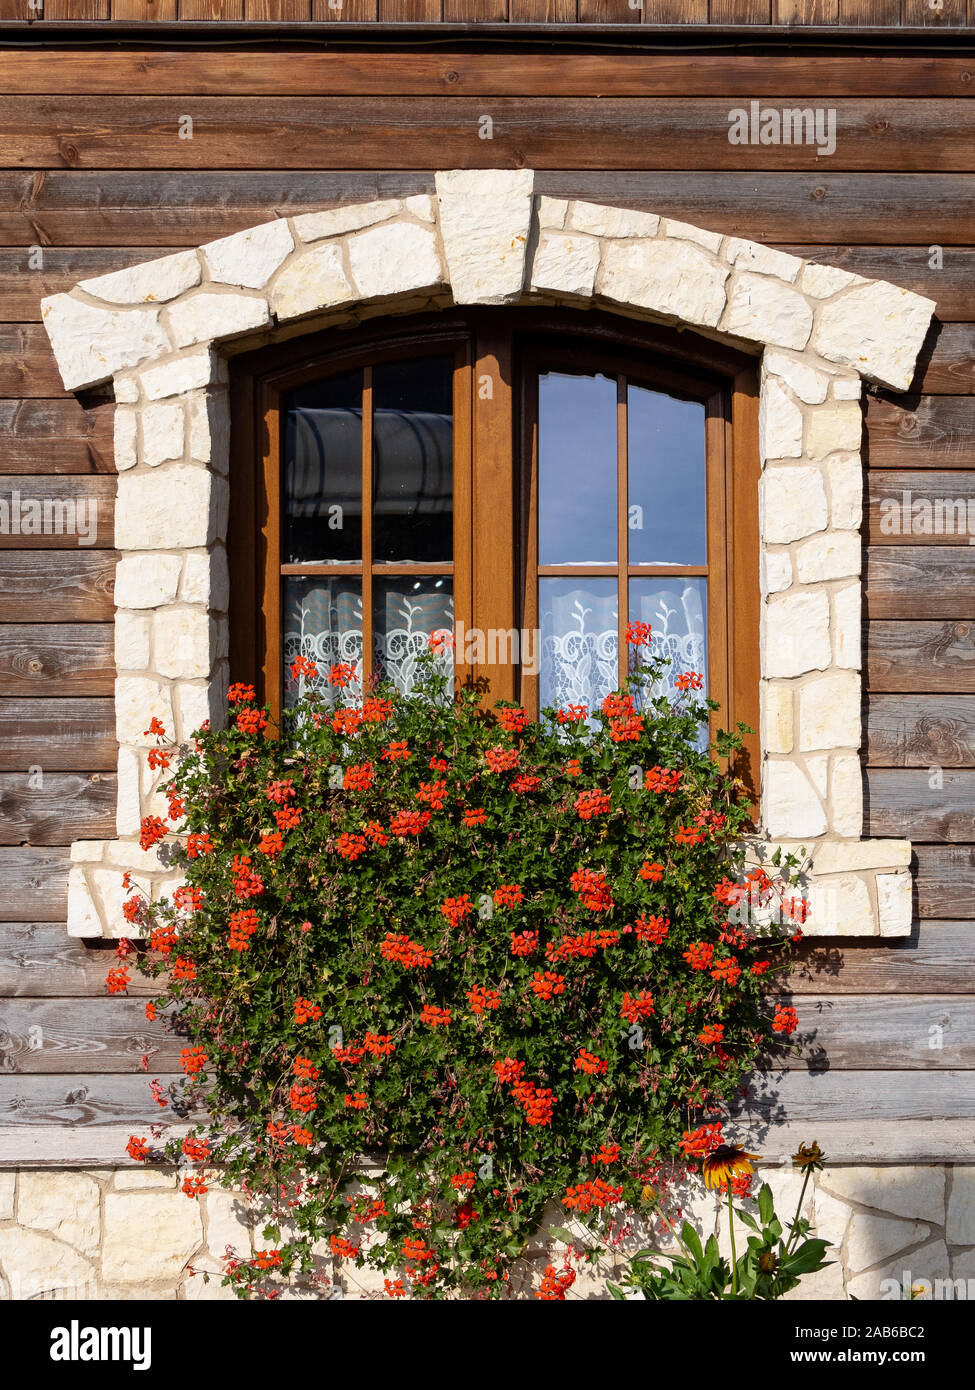 Window of a rural wooden house. A beautiful, flowered, stone-framed window in the wooden wall of the house. Bright, warm colors. Daylight. Stock Photo